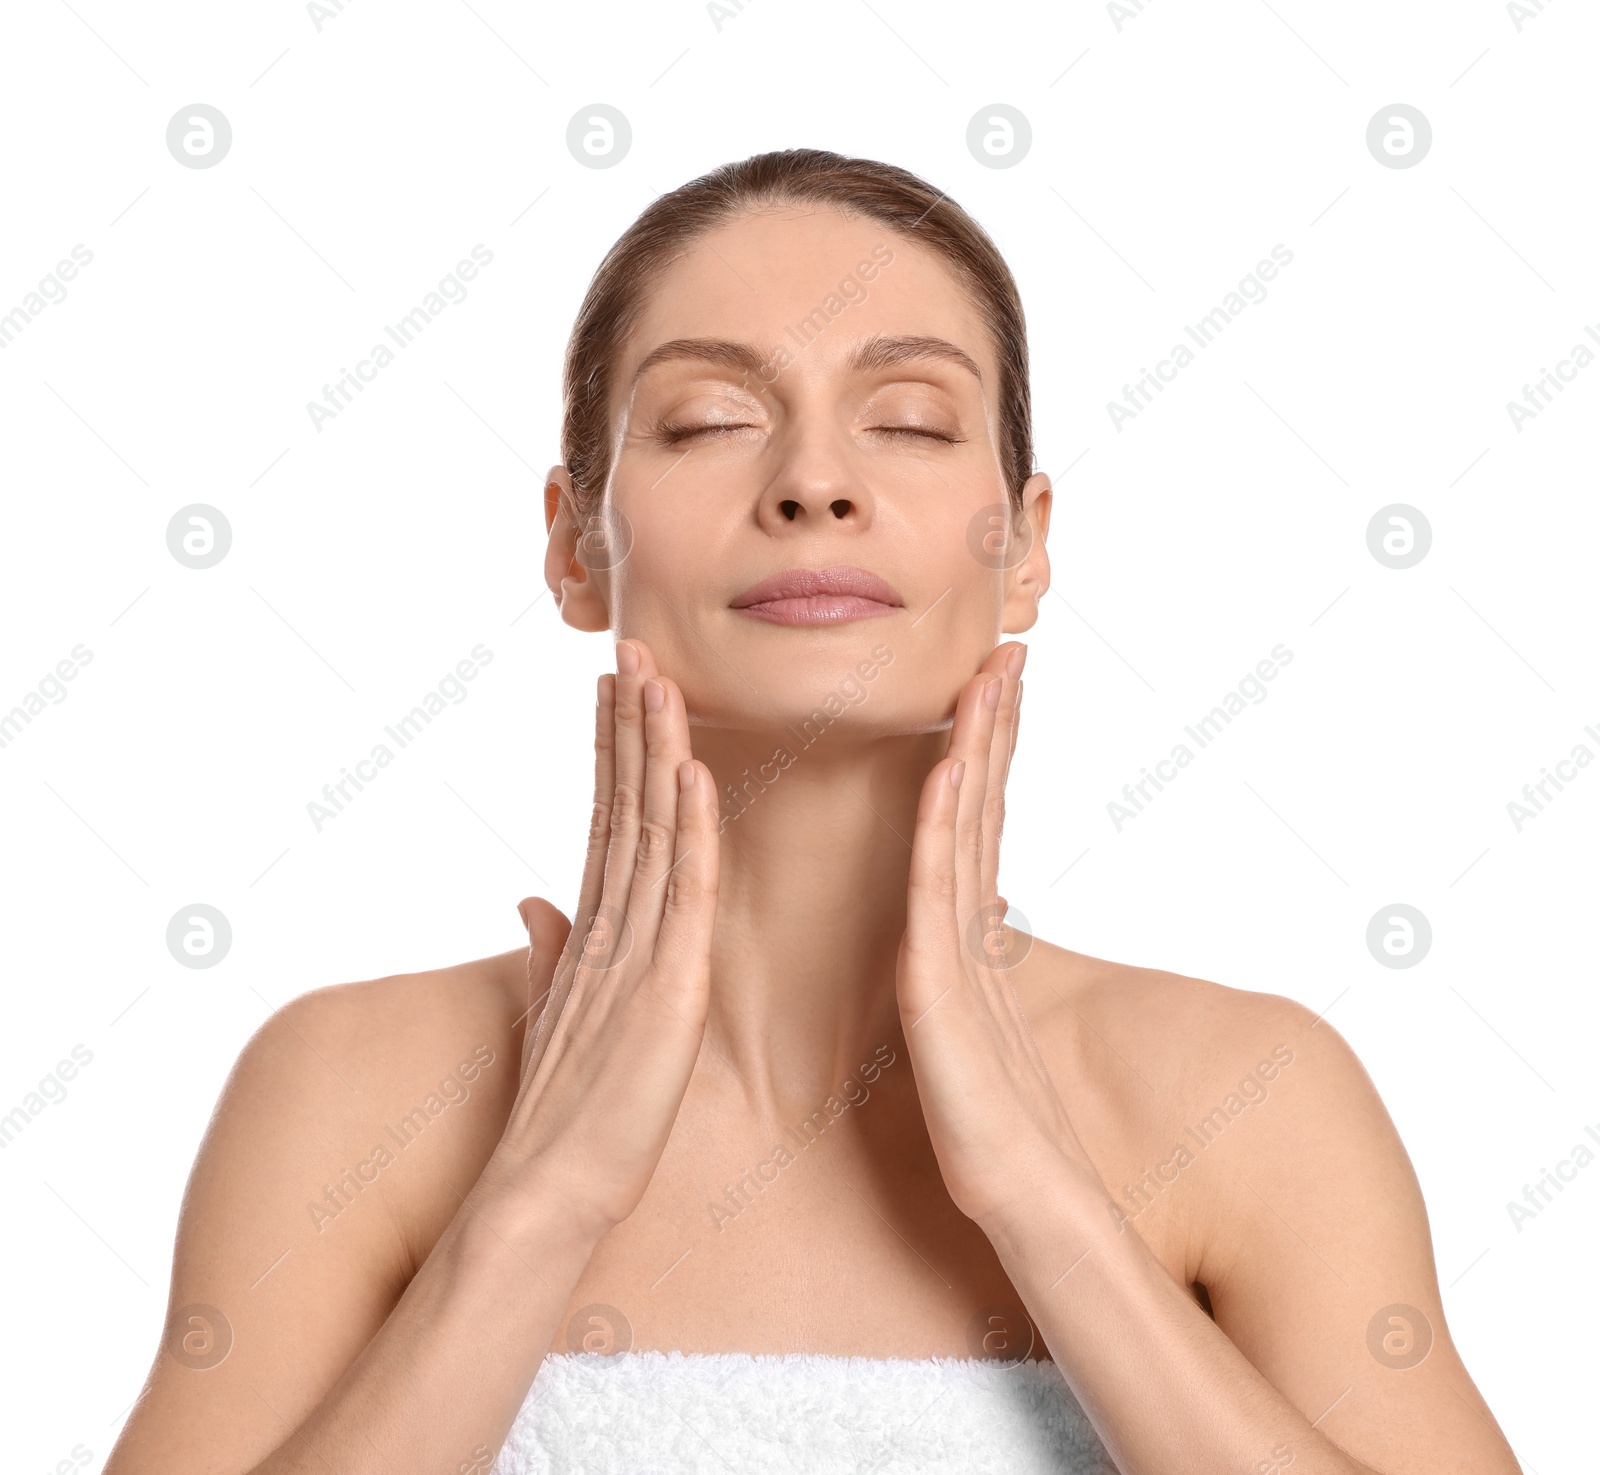 Photo of Woman massaging her face on white background